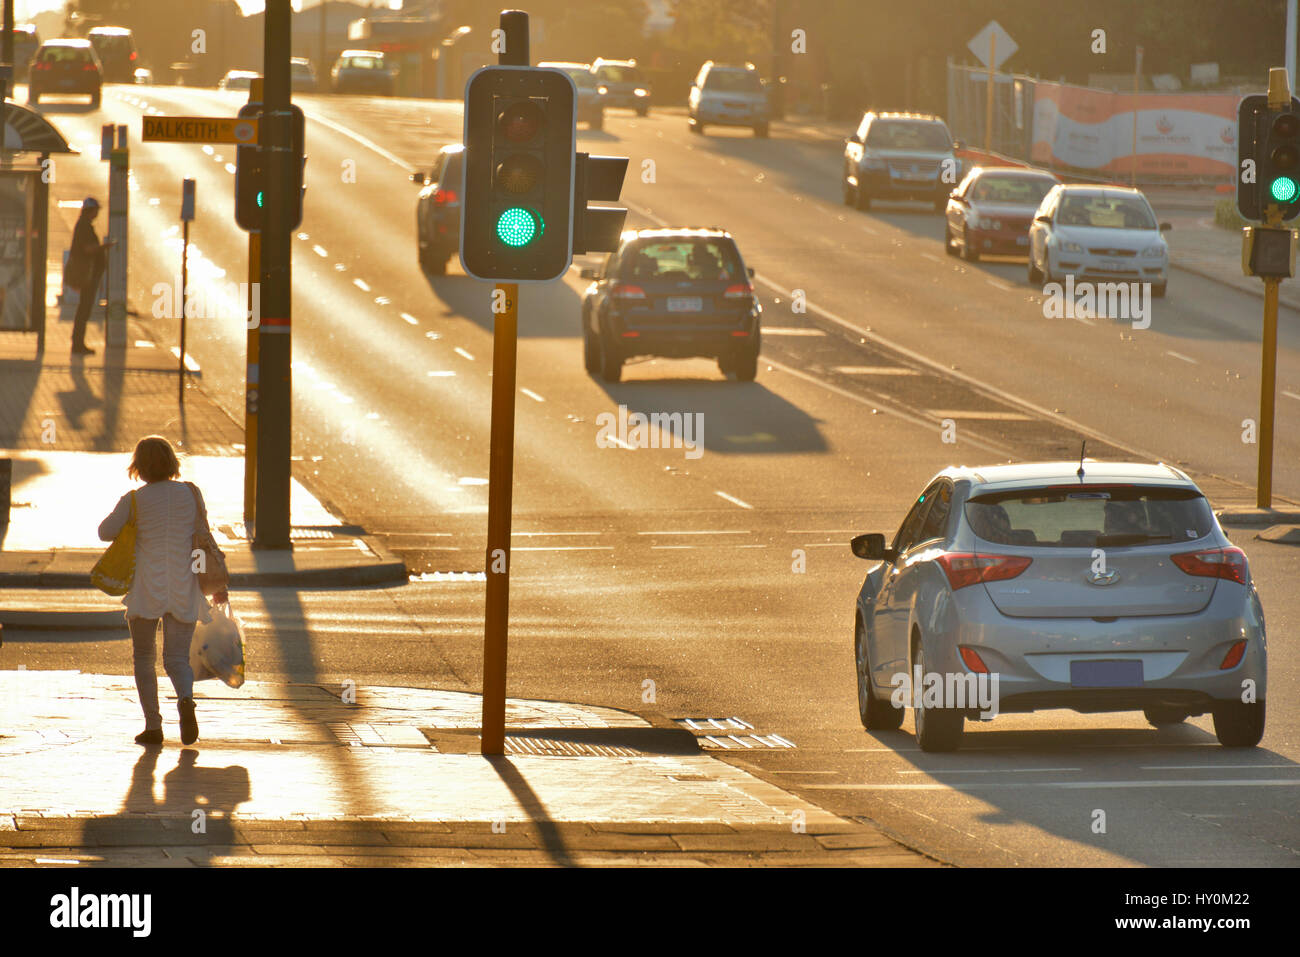 Woman carrying shopping on footpath alongside a busy road with traffic, at sunset. Stock Photo